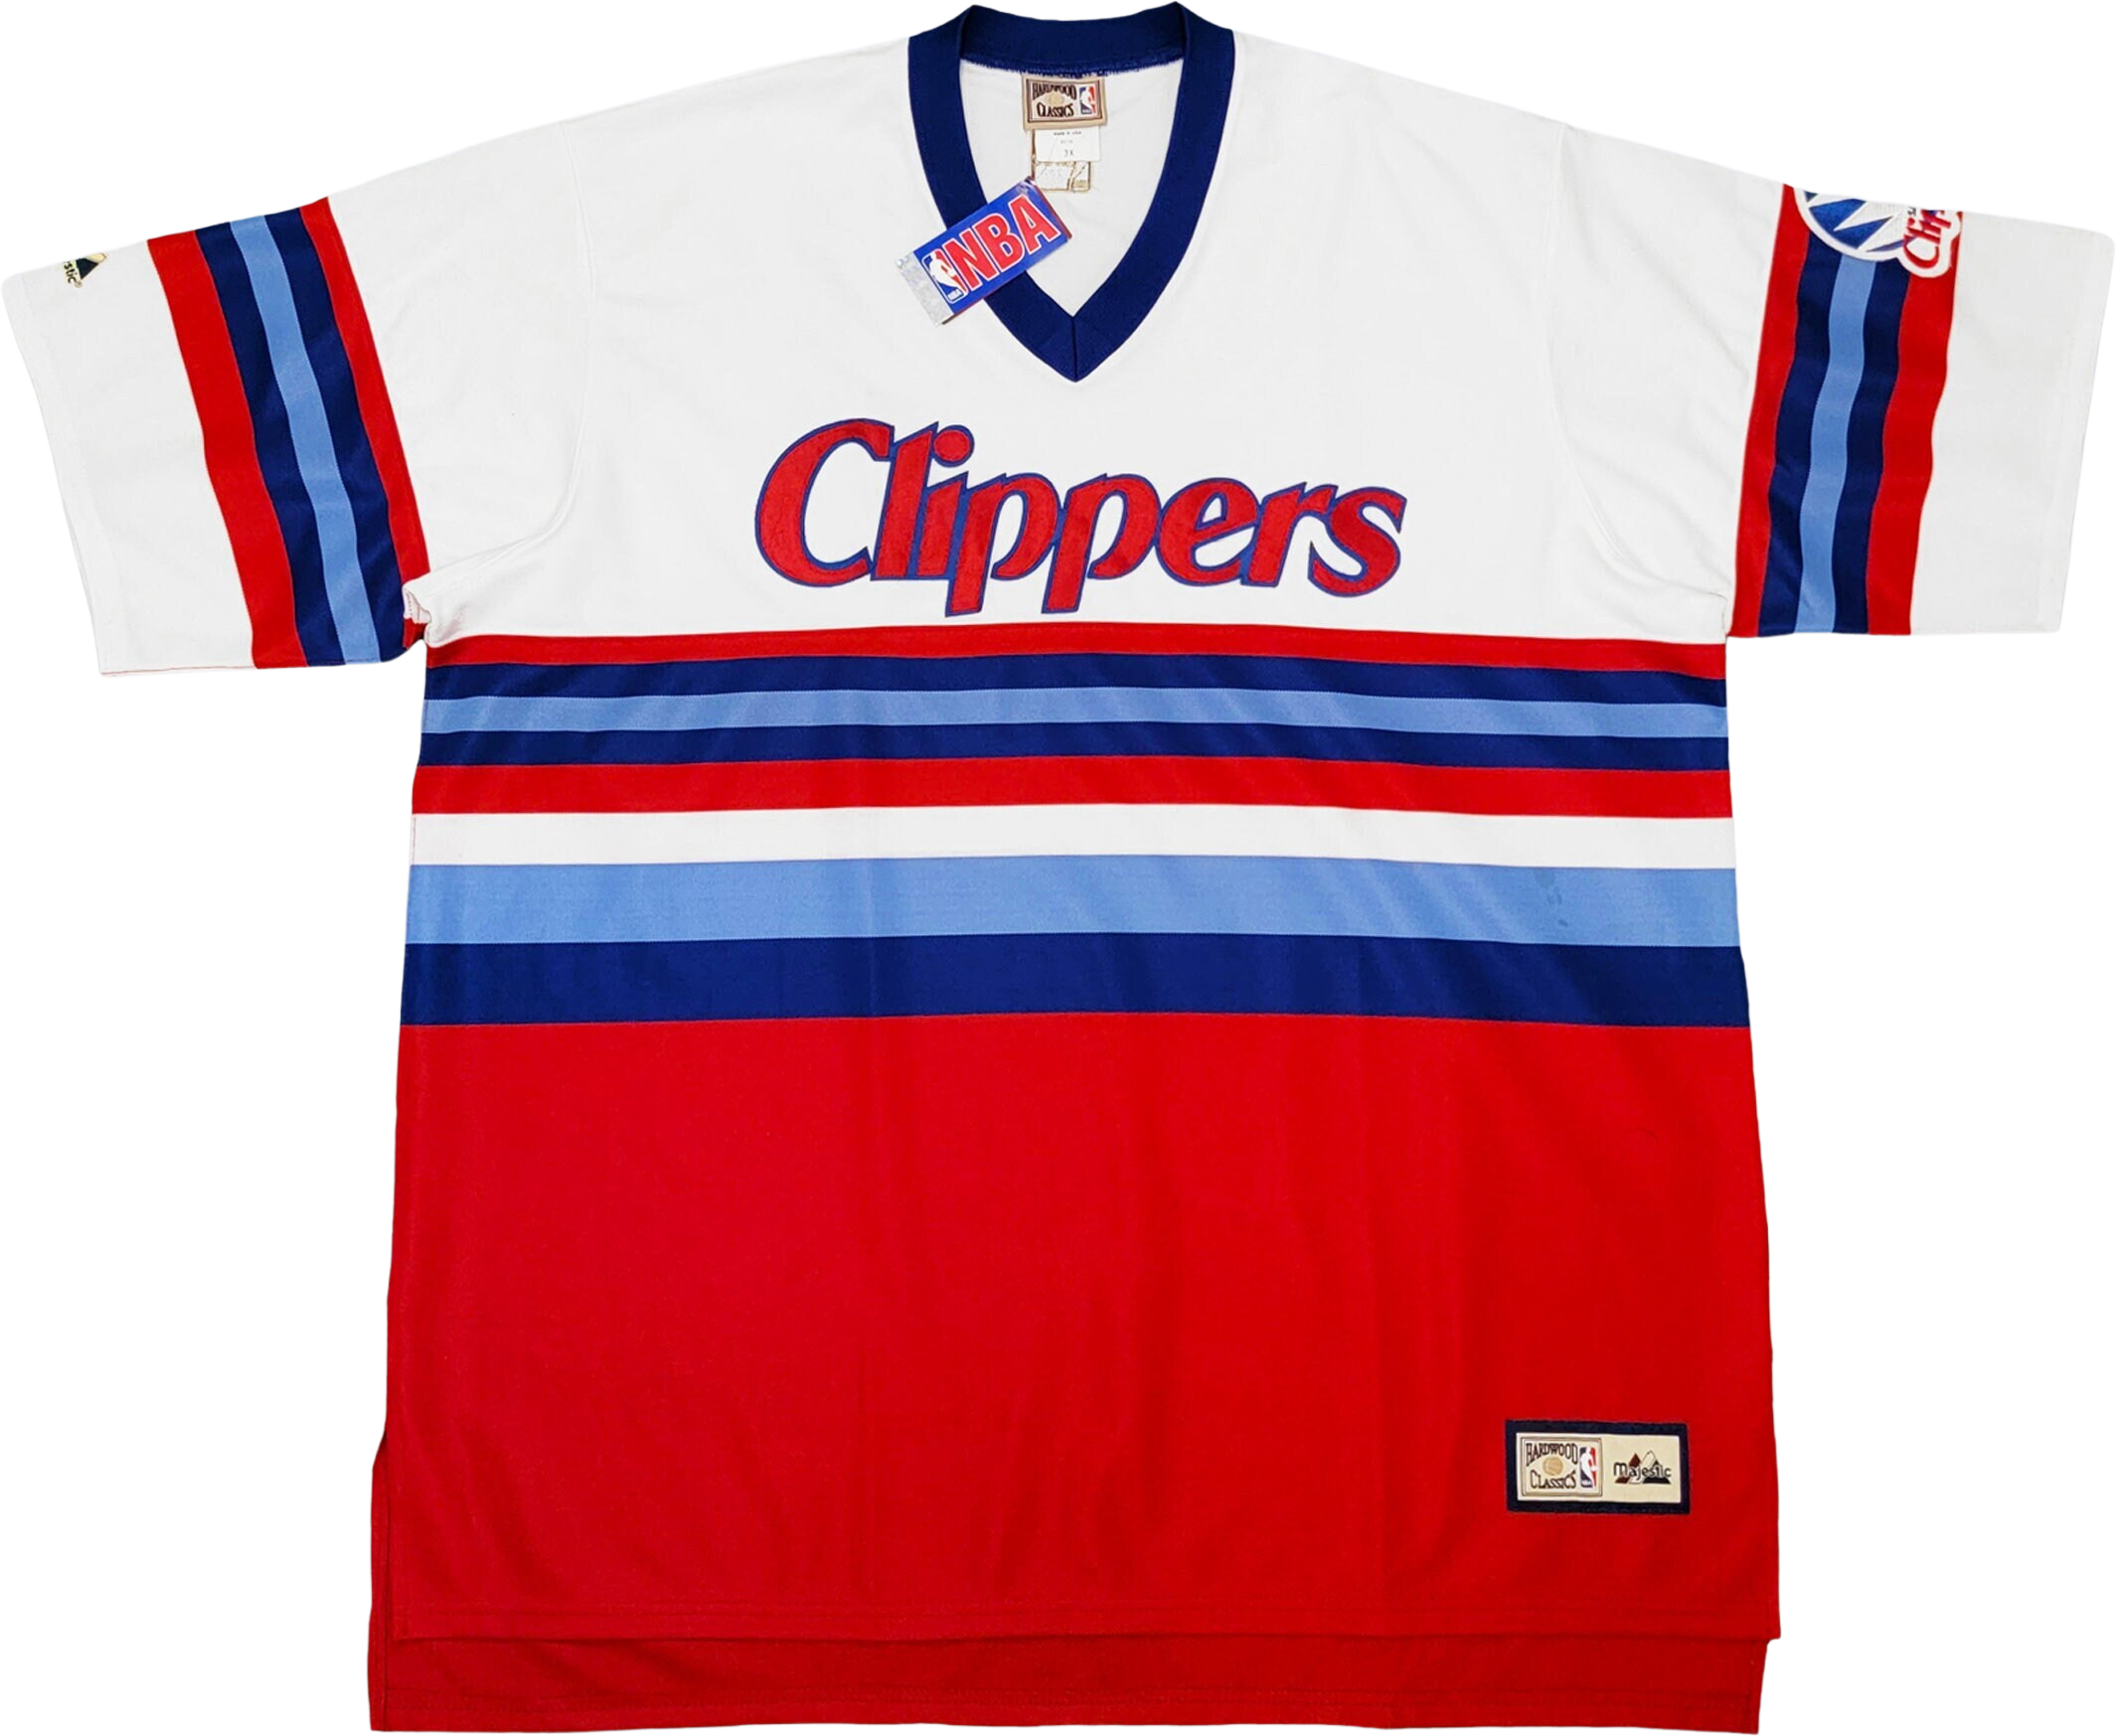 San Diego Clippers Vintage 00s Majestic Warm Up Jersey - Deadstock - NBA  Basketball - Hardwood Classic - Size Men's XXXL - 3XL-FREE Shipping